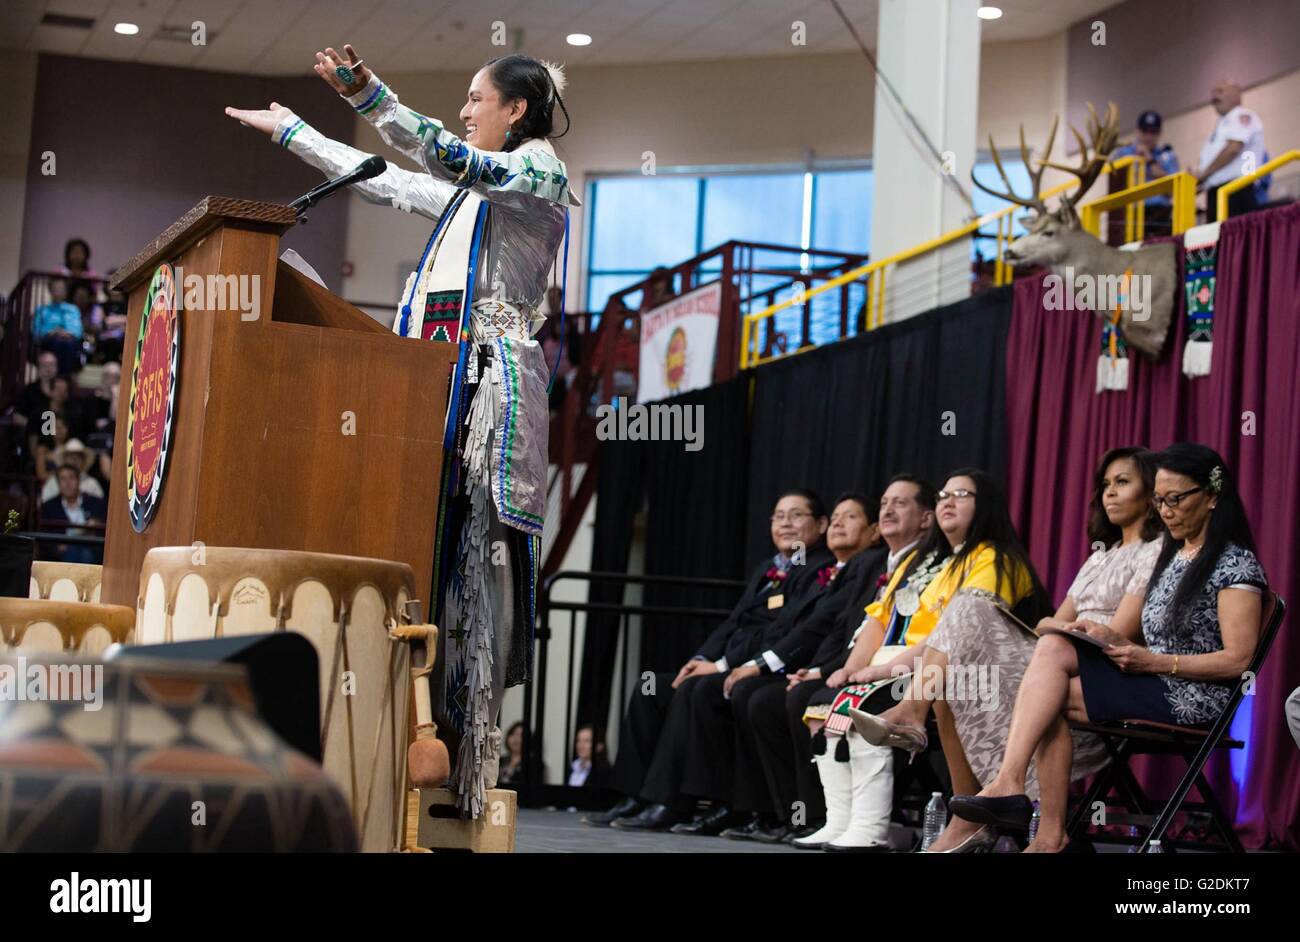 Emanuel Vigil delivers the Valedictorian speech as U.S First Lady Michelle Obama looks on during the Santa Fe Indian School high school commencement ceremony May 26, 2016 in Santa Fe, New Mexico. Stock Photo